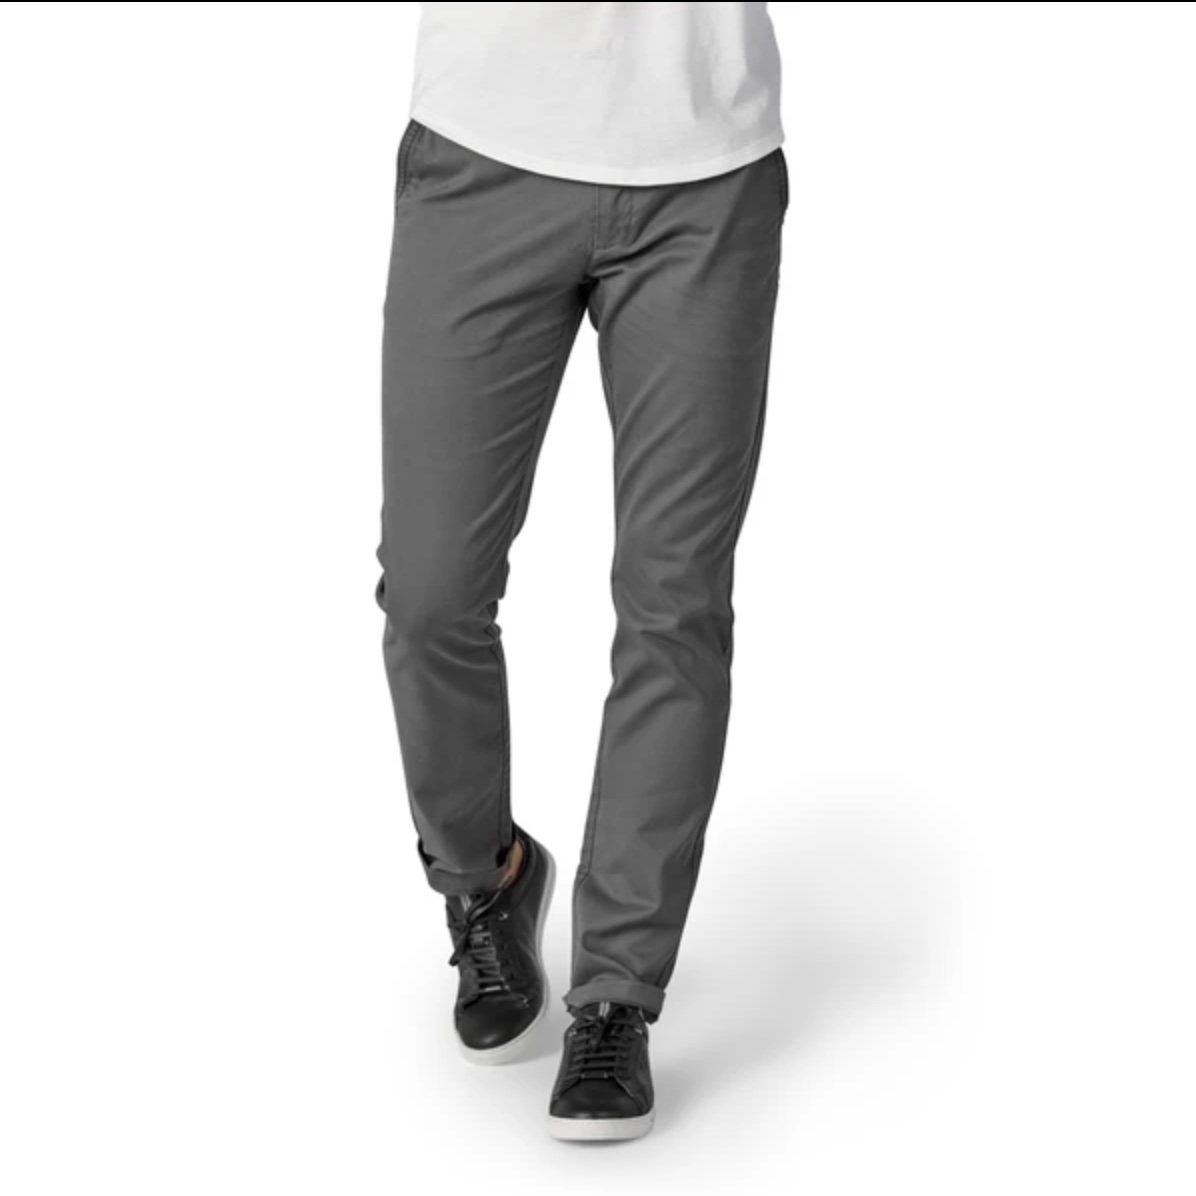 While shopping online is convenient, choosing the right trouser pants for men can become a bit overwhelming. Here's our top tips.